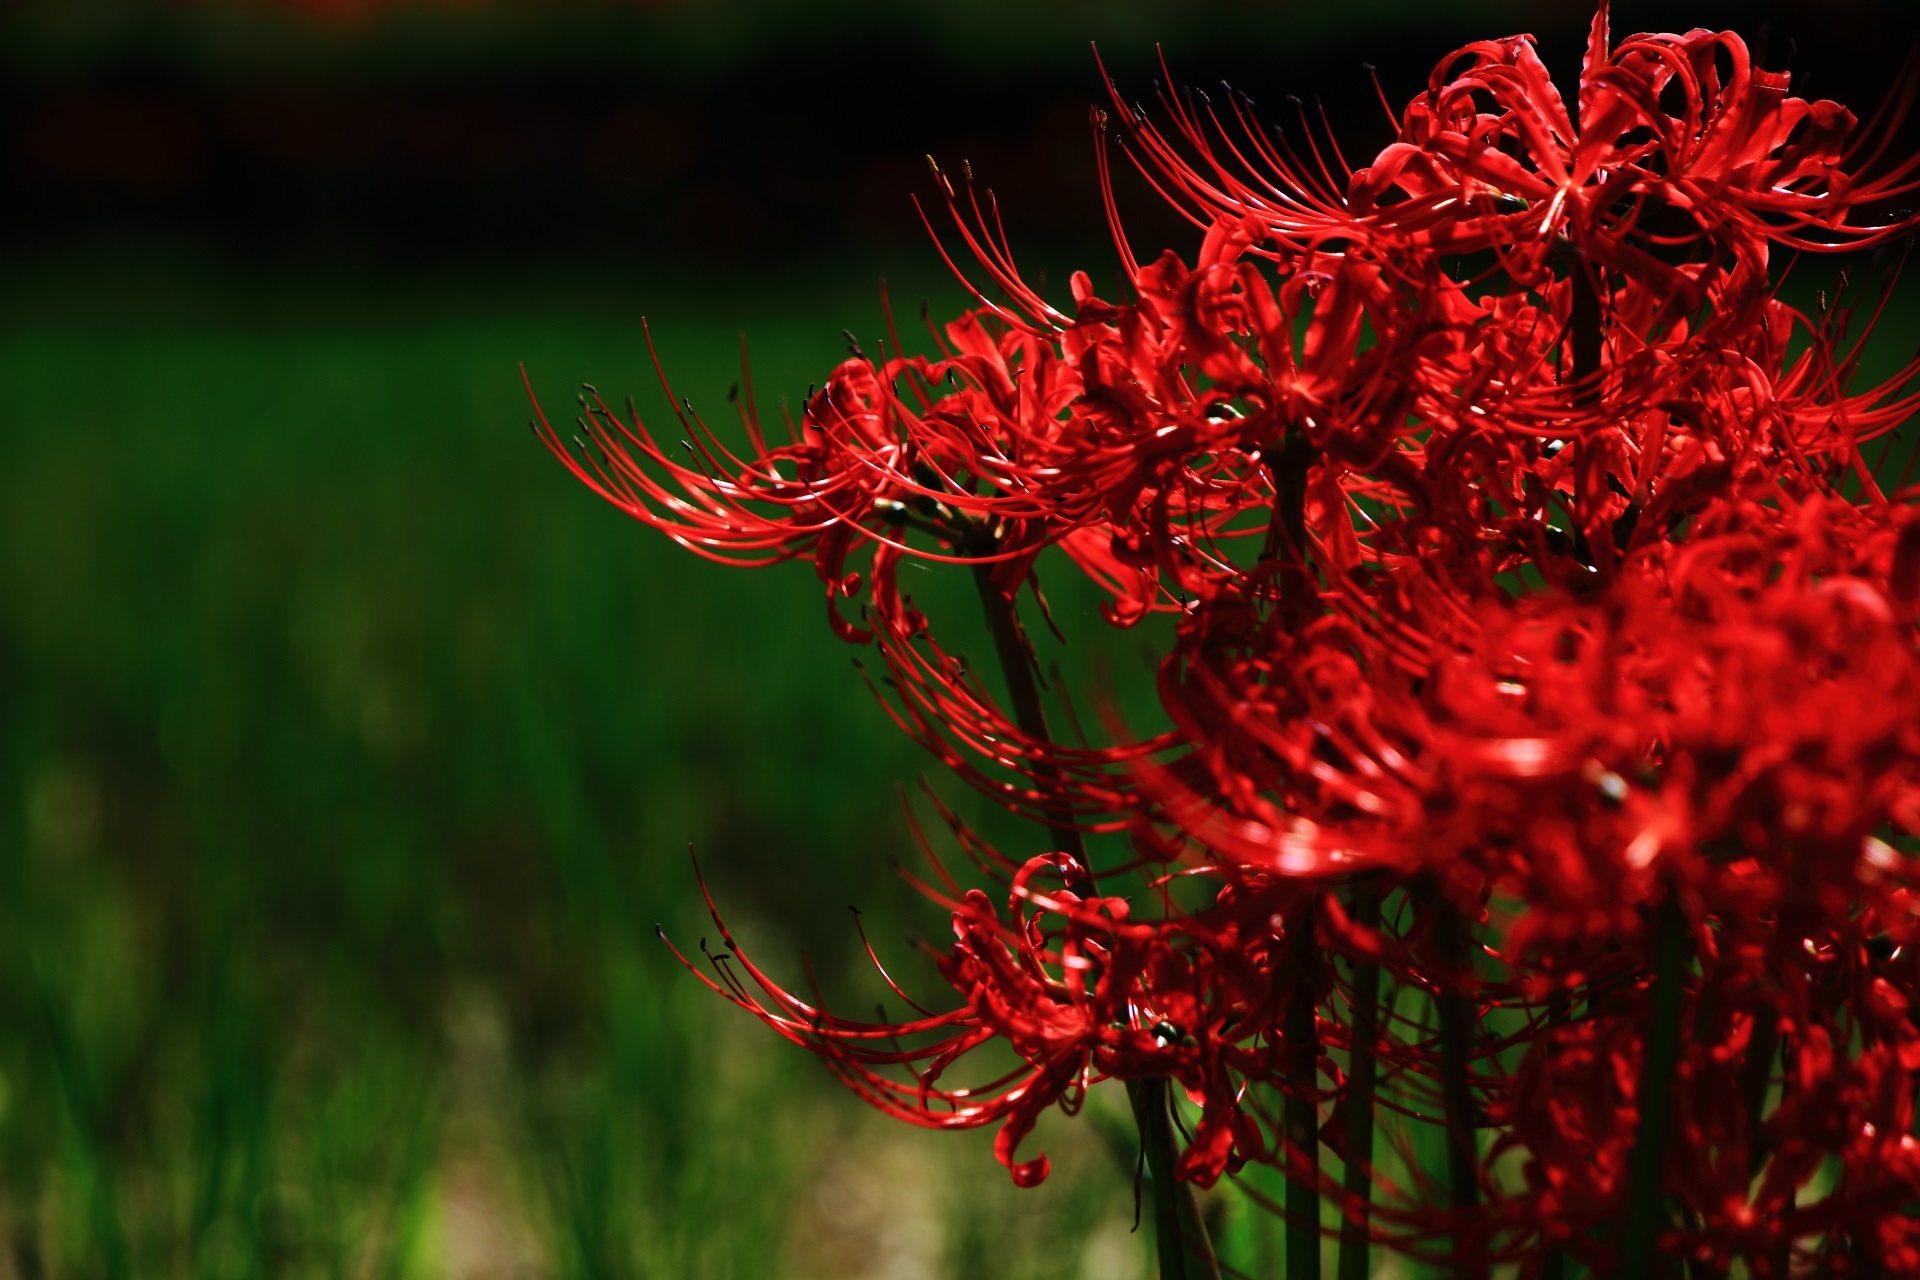 Brilliant cluster amaryllis of the village of Ohara-no-Sato in Kyoto,Japan